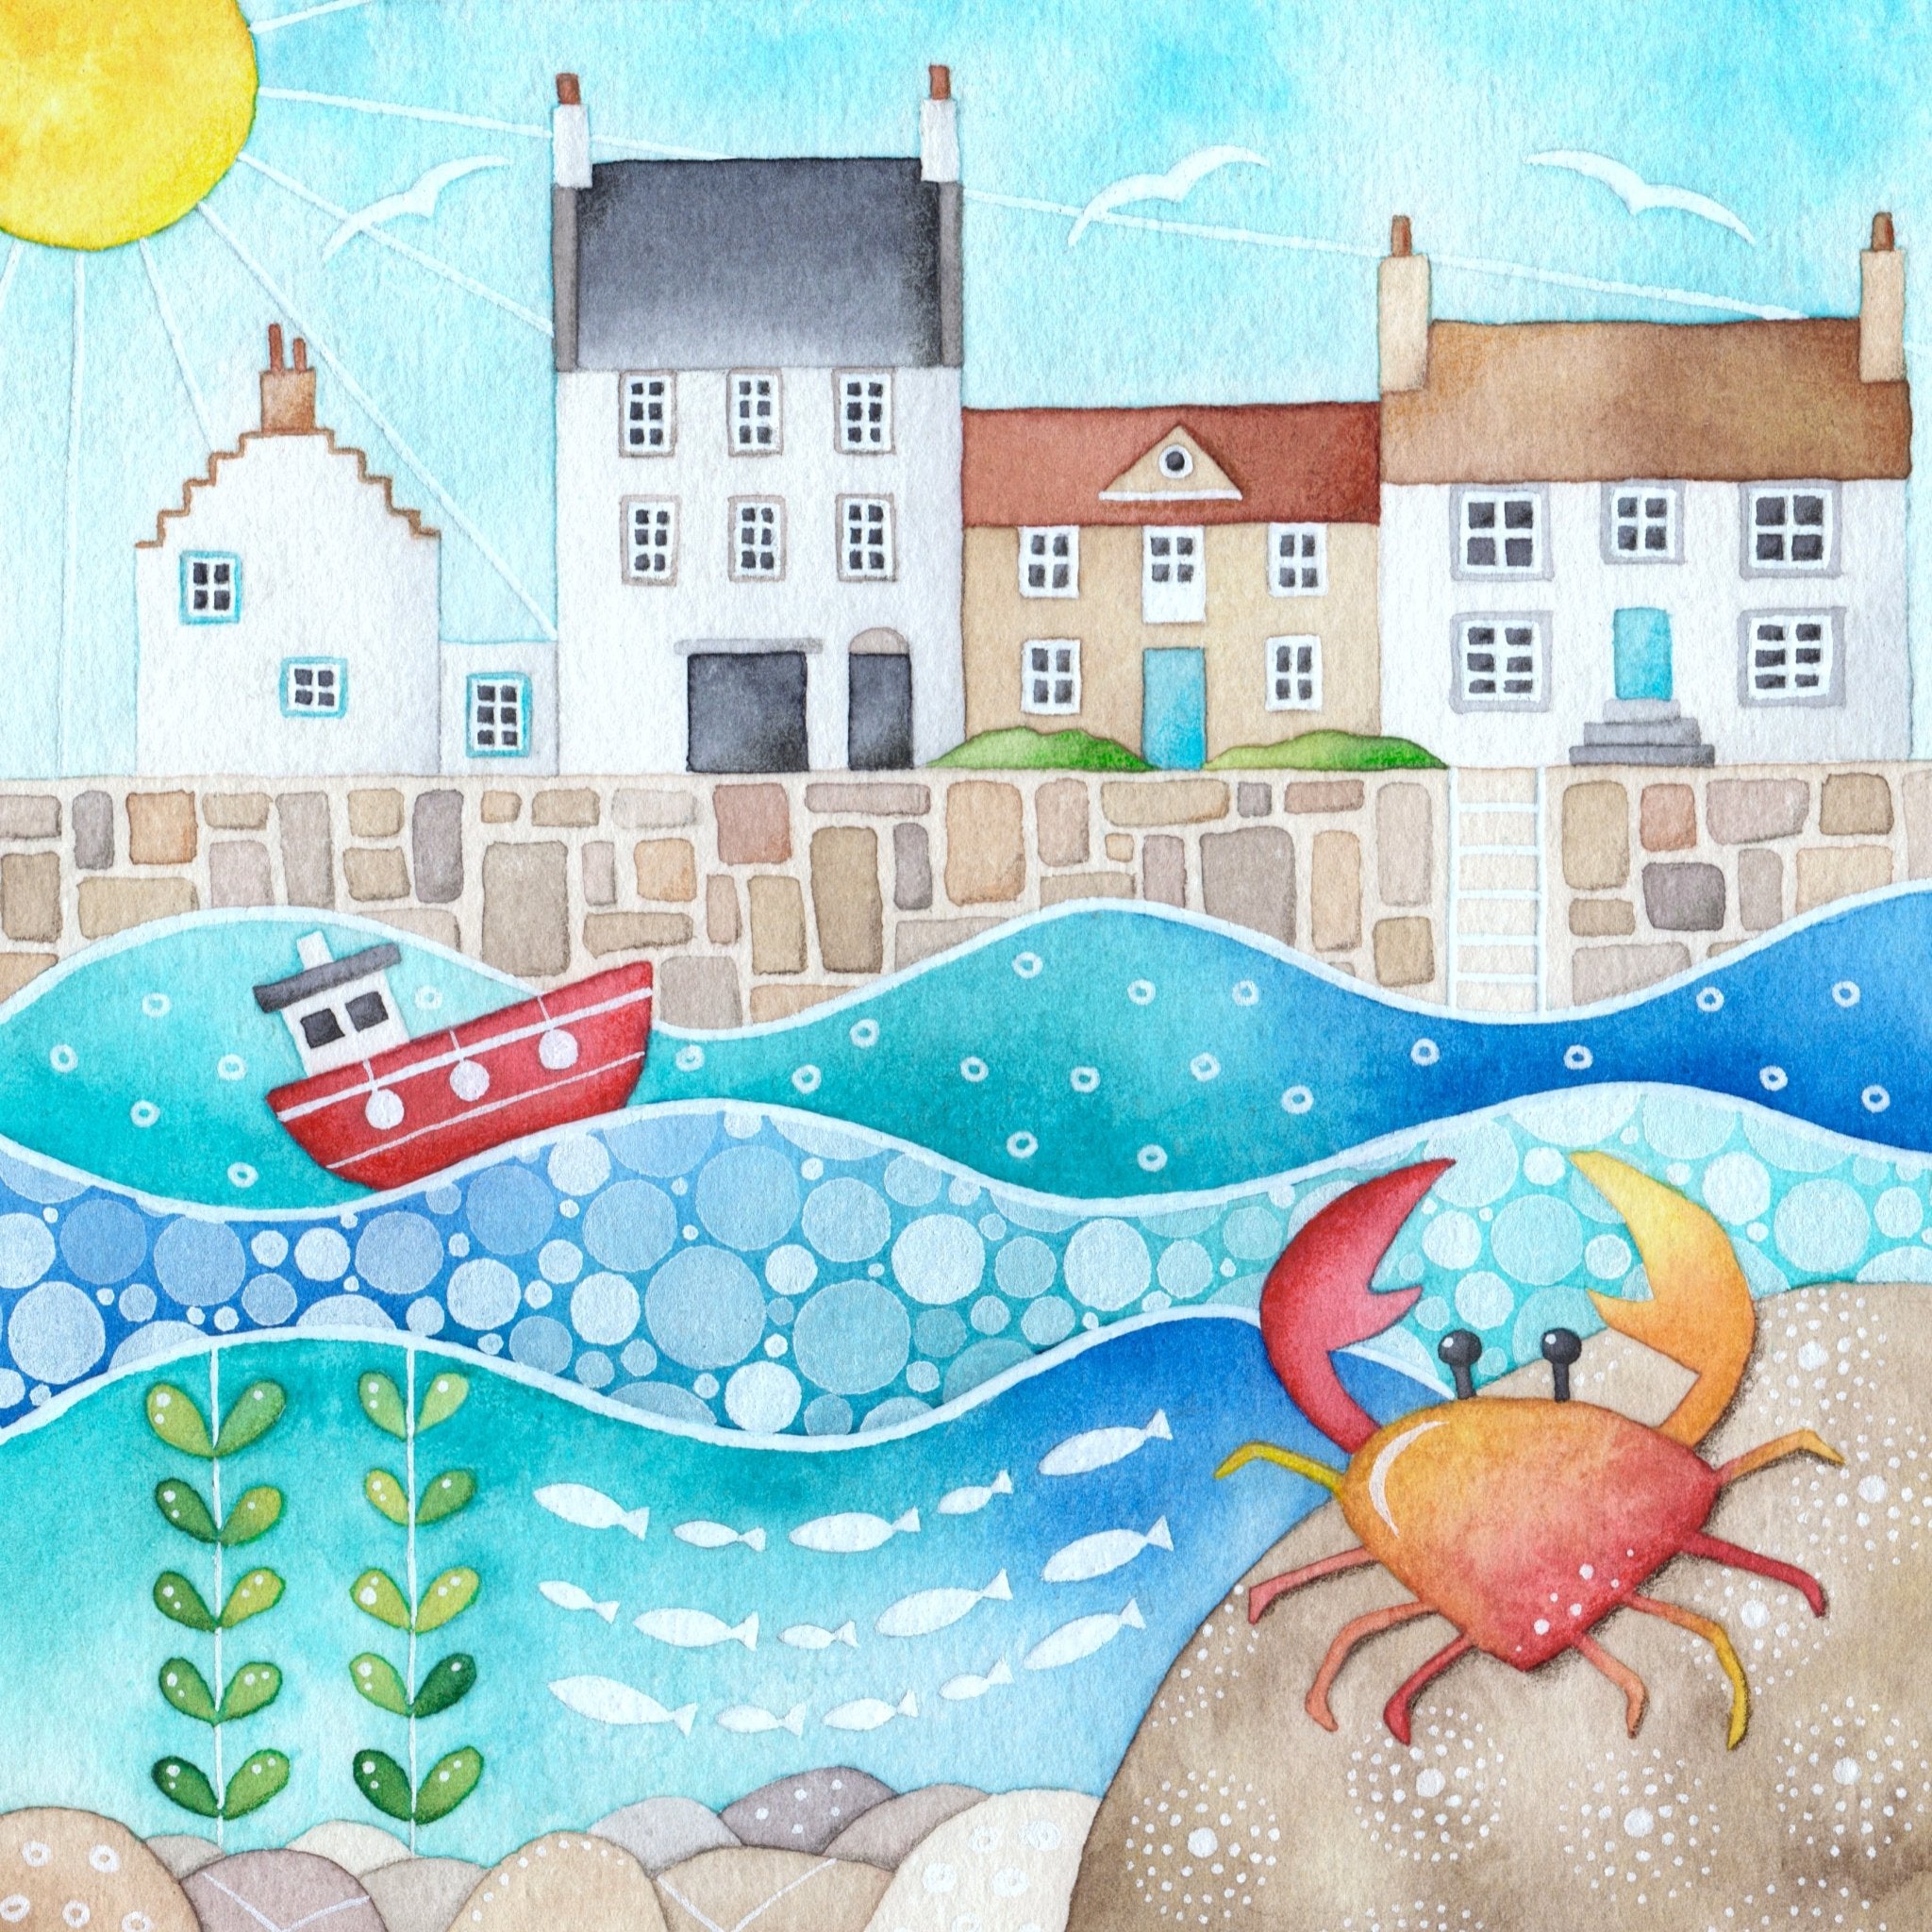 Crail Harbour & Crab Print - Seaside Watercolour Painting - Limited Edition Signed Art - East Neuk Beach Crafts